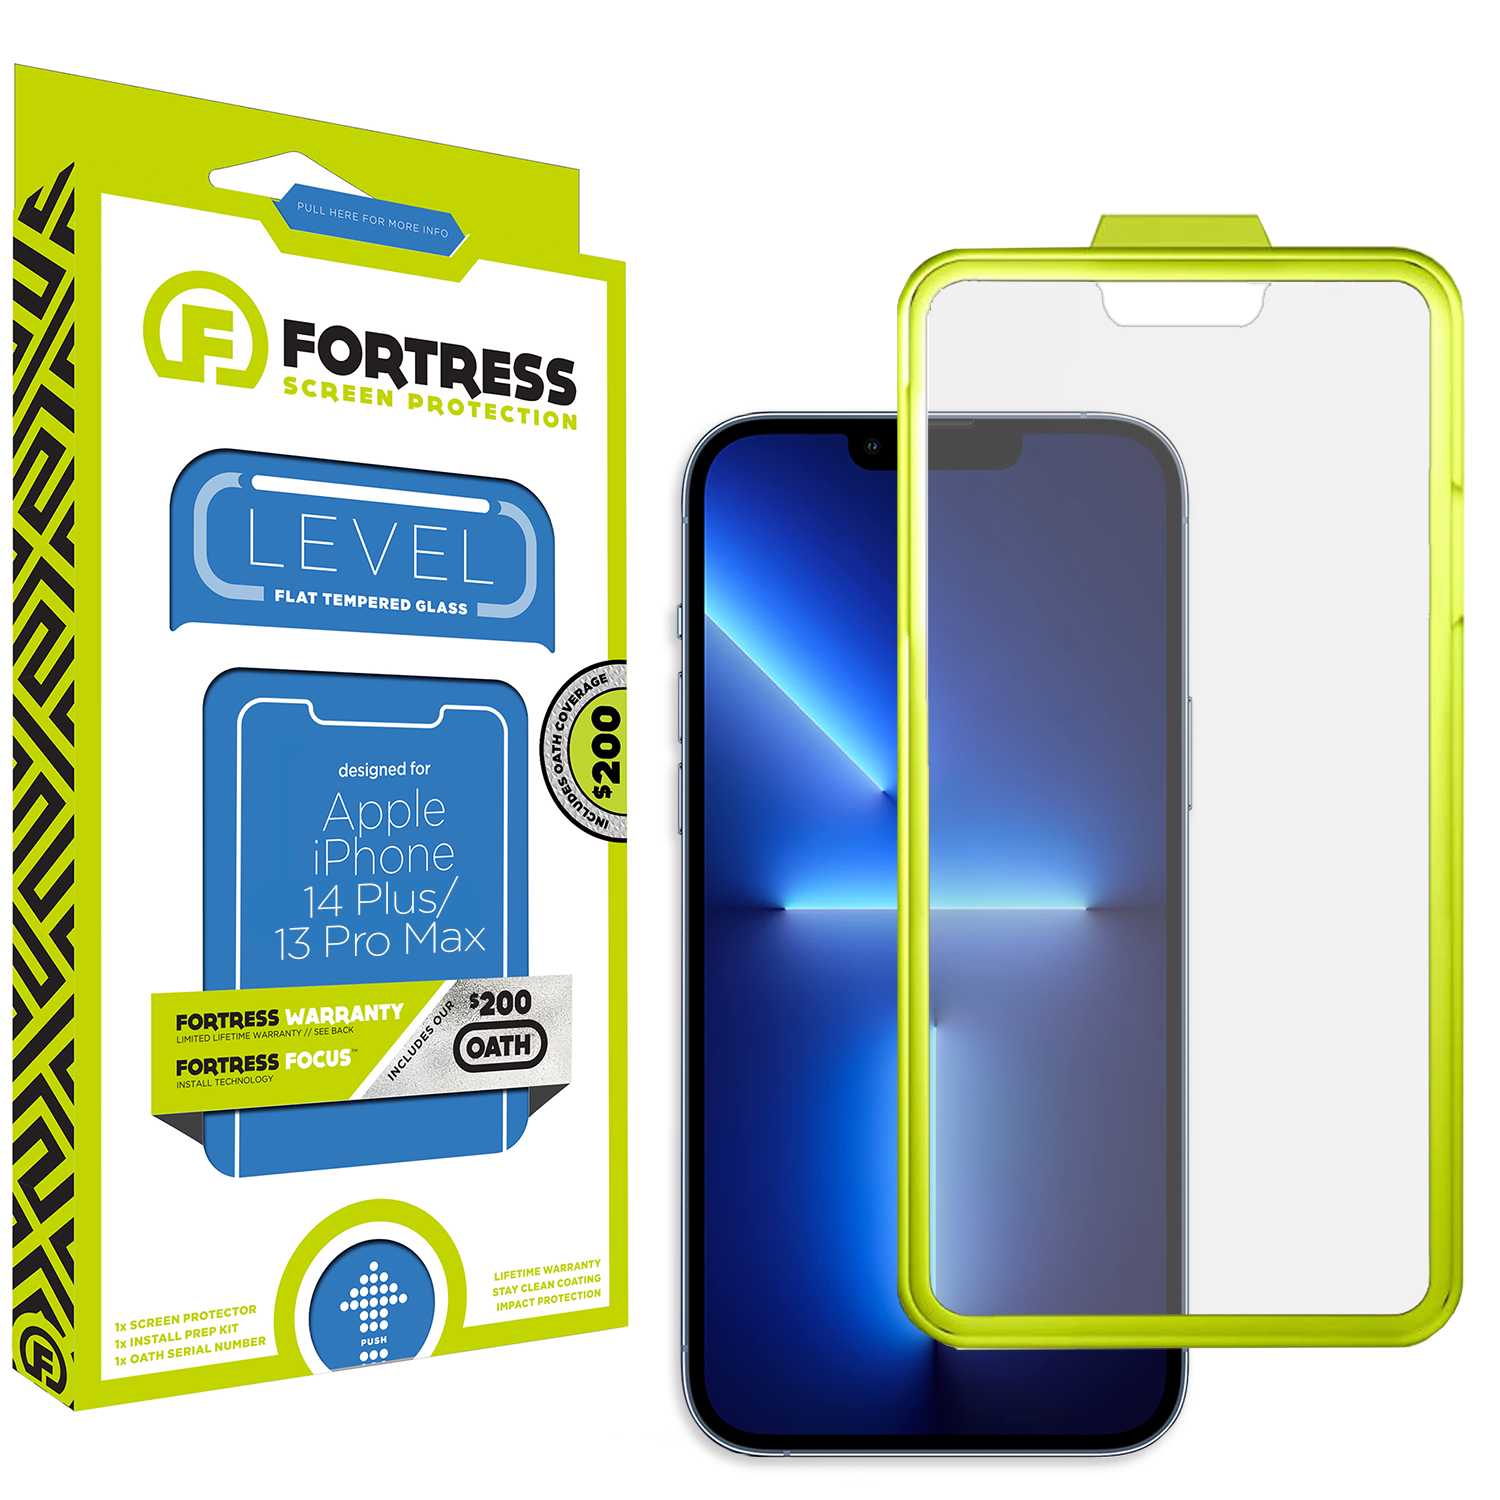 Fortress iPhone 13 Pro Max Screen Protector $200CoverageInstallTool Scooch Screen Protector